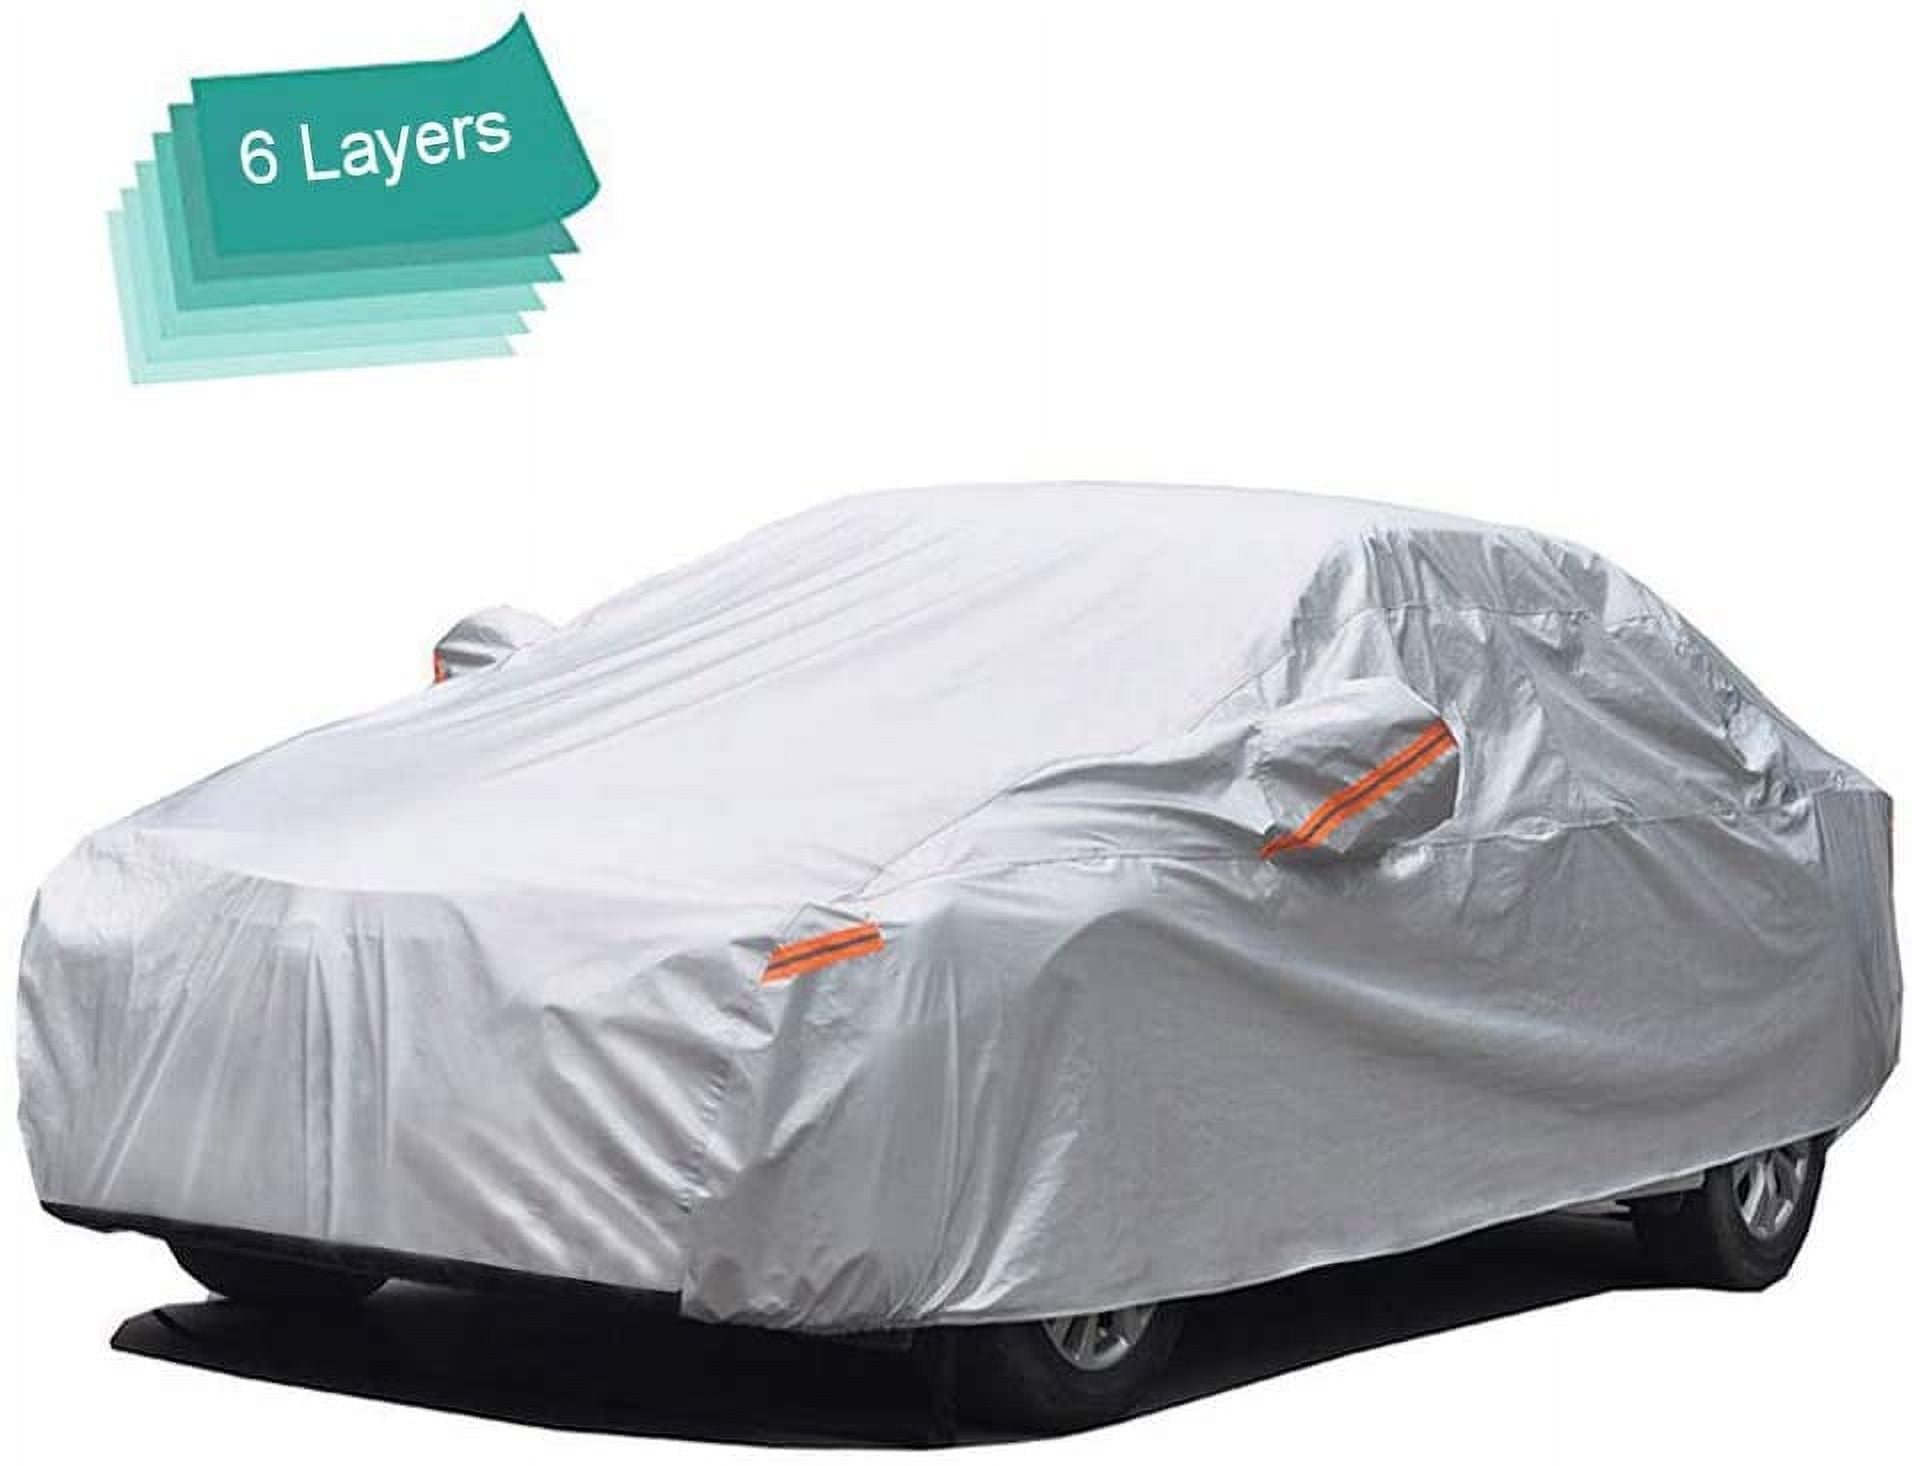  GUNHYI Car Cover Custom Fit Volkswagen Eos from 2006 to 2015,  Oxford Full Exterior Cover Waterproof All Weather, Outdoor Snow Sun Rain Uv  Protection (Deliver 3-8 Days) : Automotive